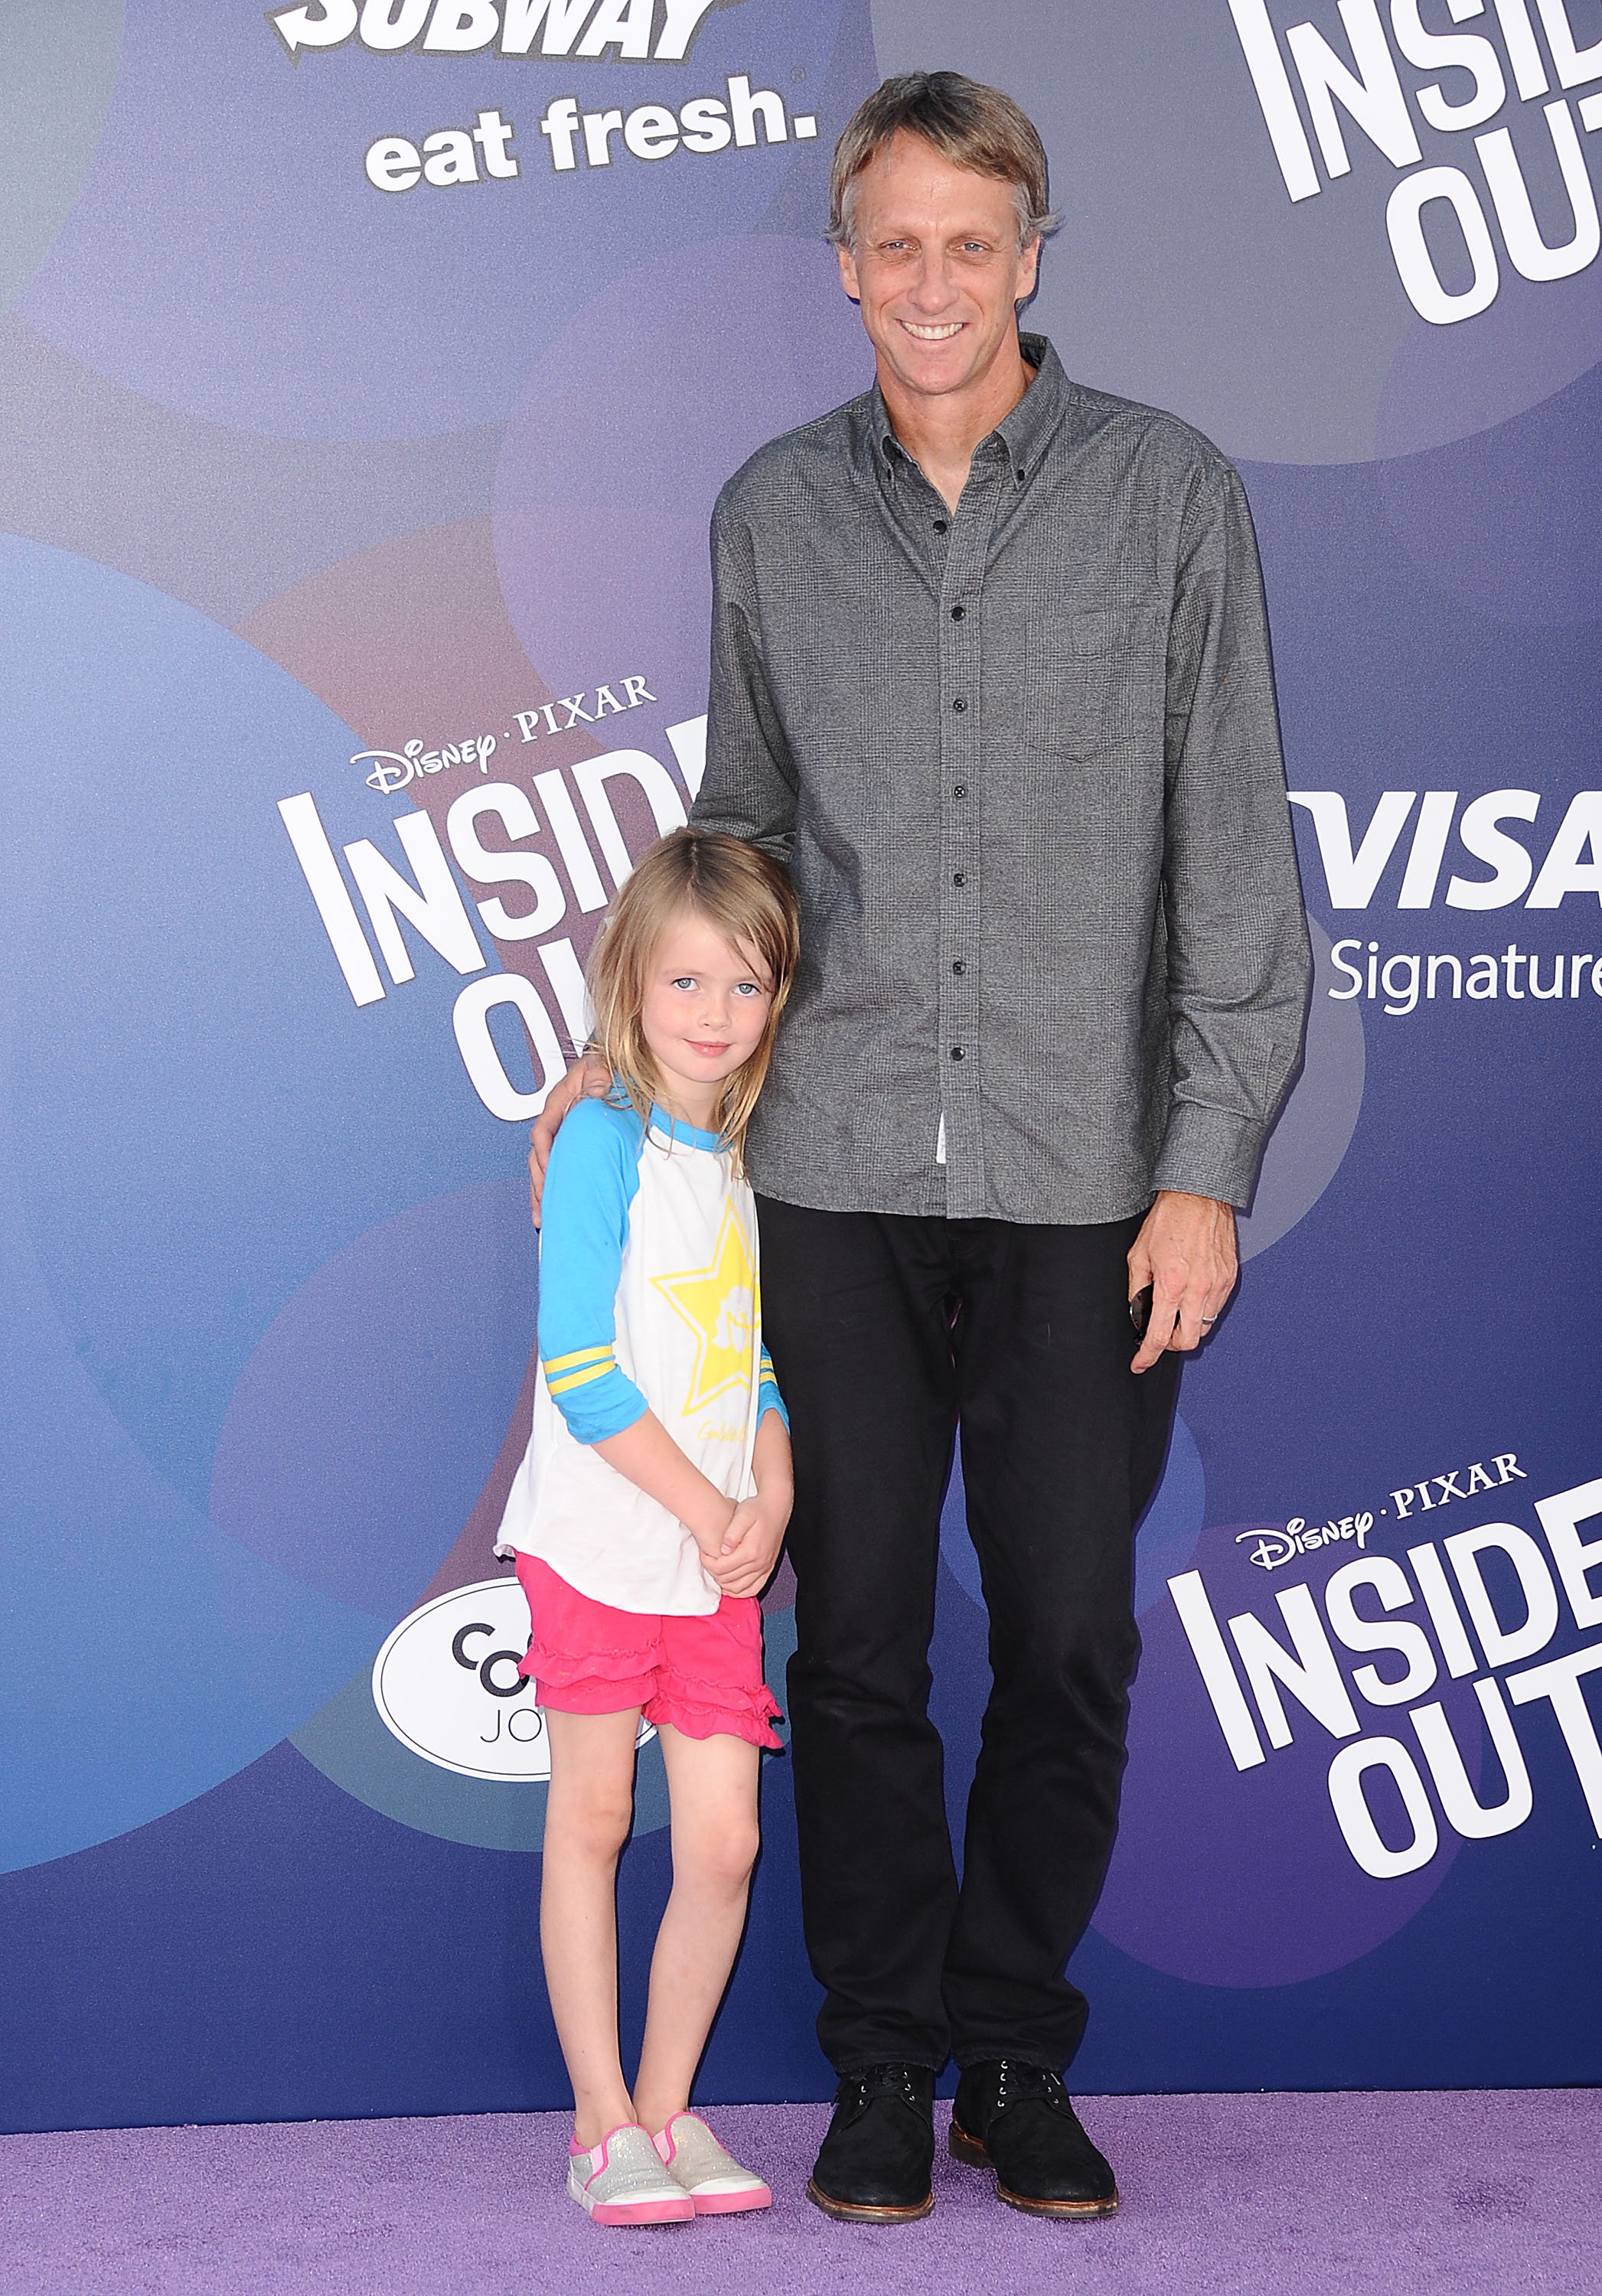 Tony Hawk and his daughter, Kadence Clover, pose on the red carpet at the premiere of "Inside Out" on June 8, 2015, in Hollywood | Source: Getty Images